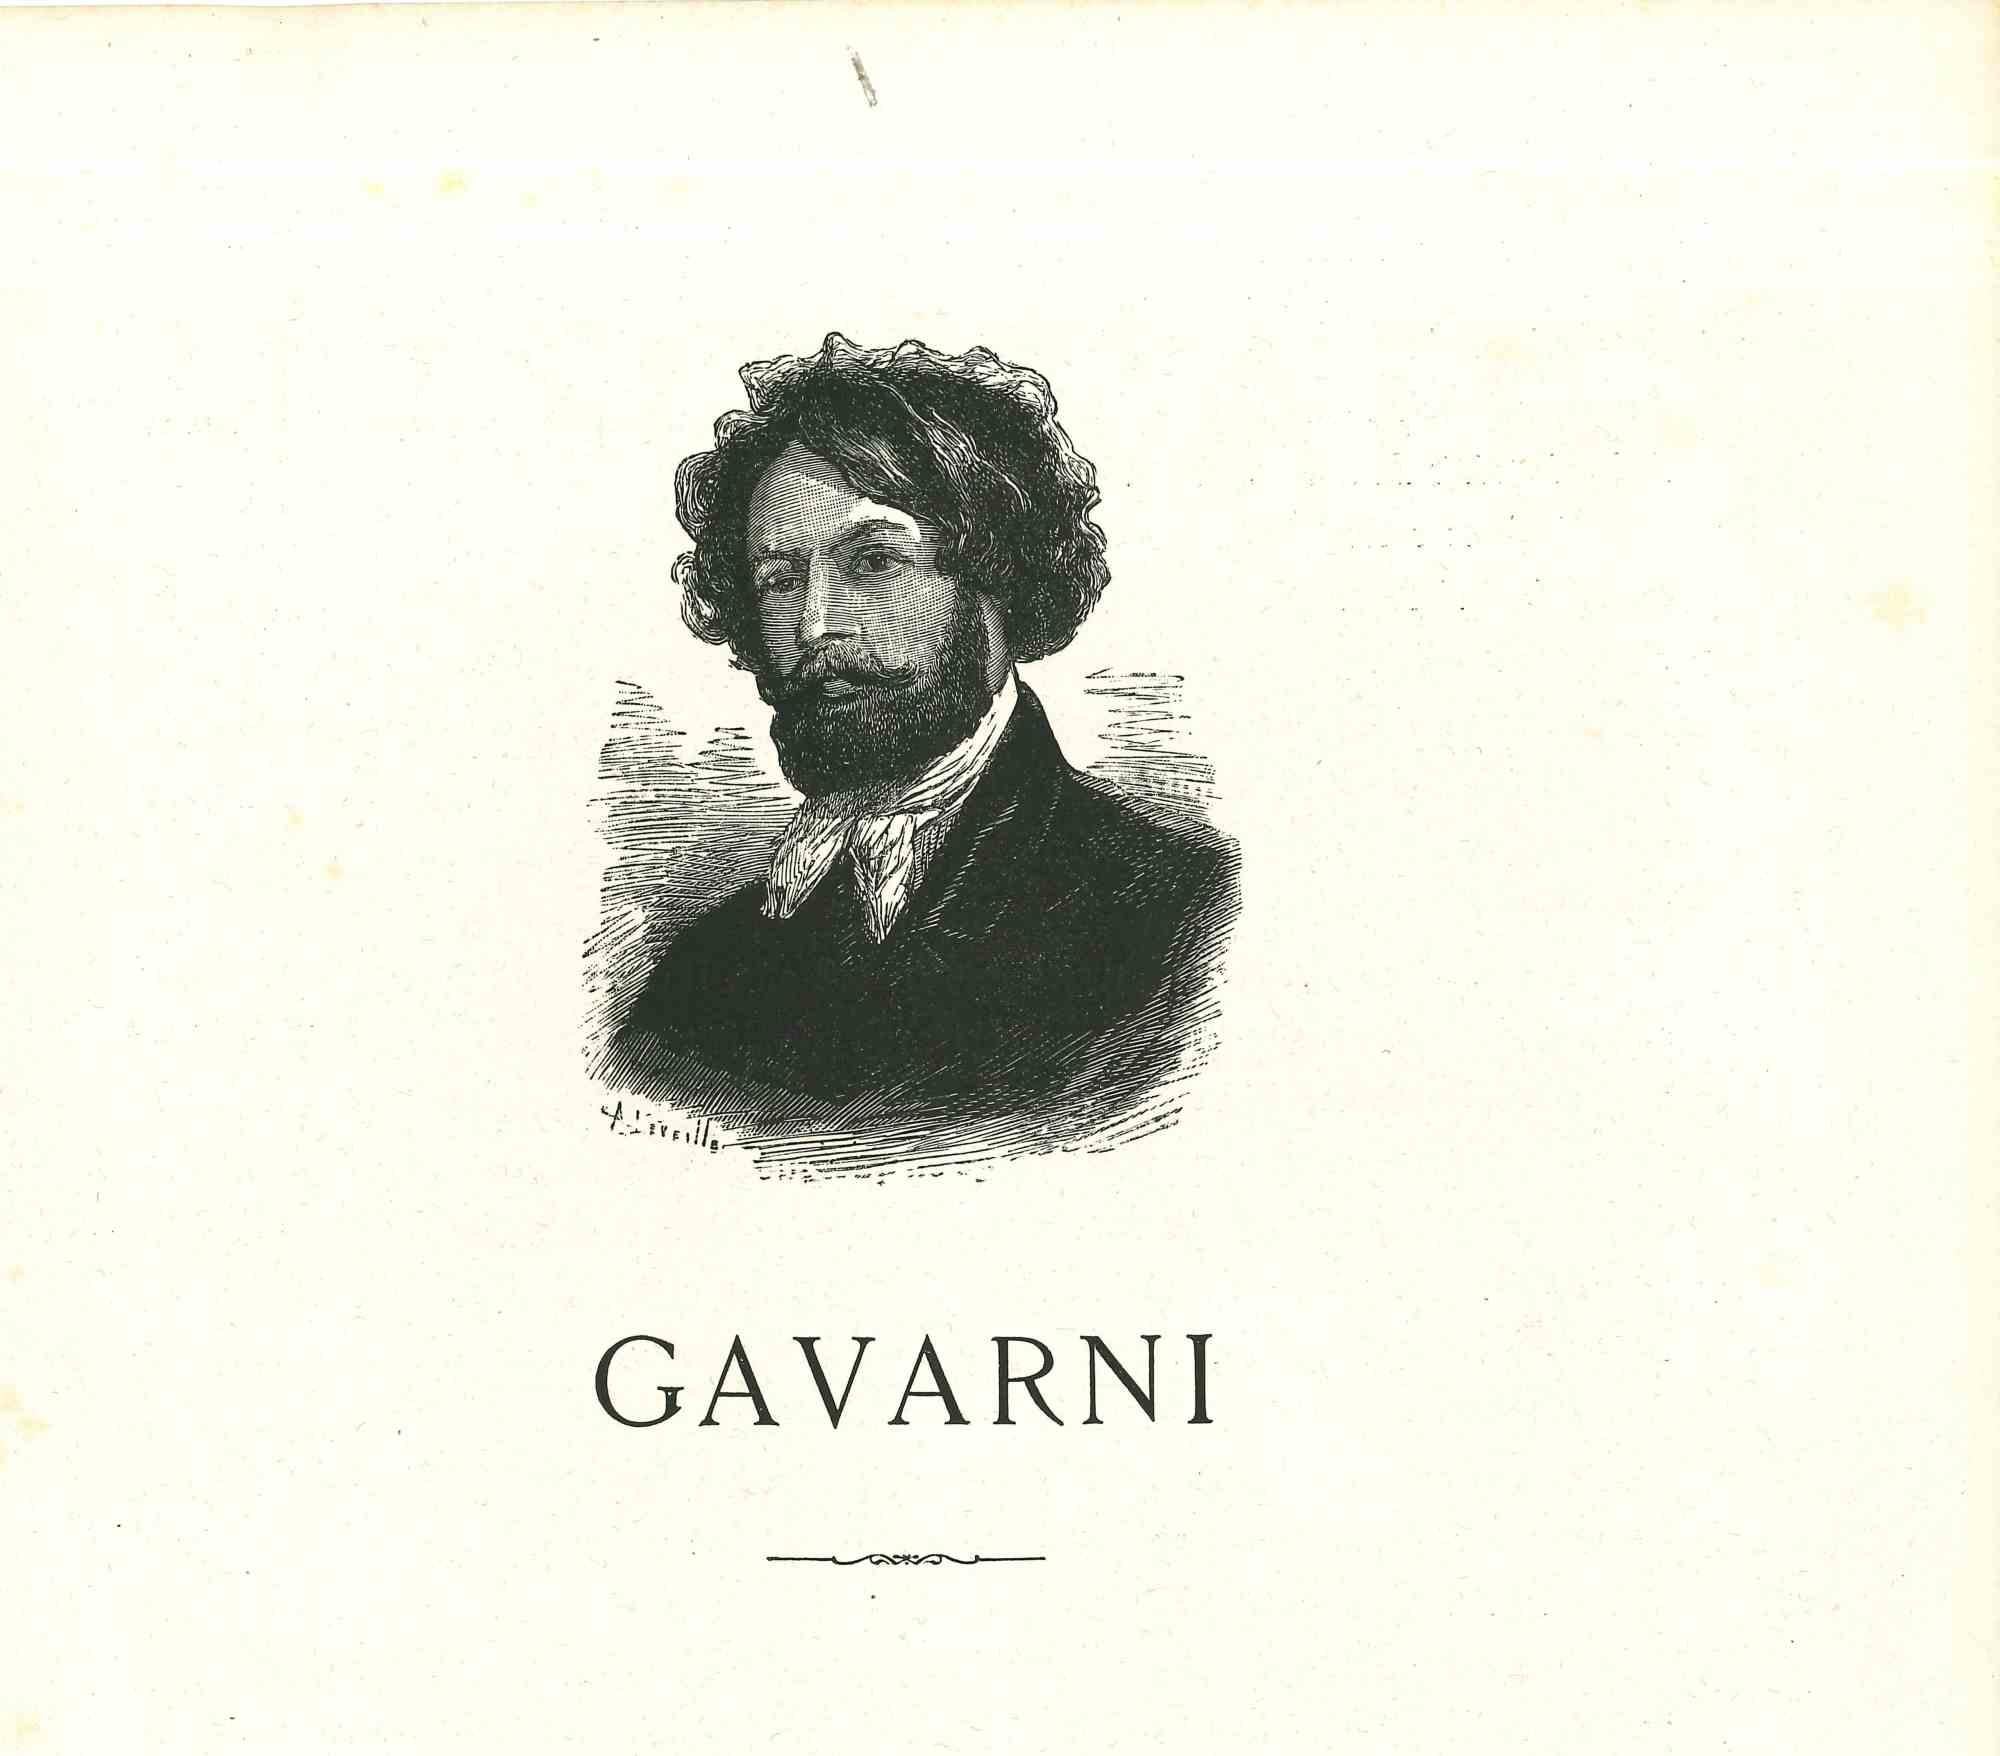 Self-portrait of Gavarni is an original lithograph artwork on ivory-colored paper, realized by the French draftsman Paul Gavarni (after) (alias Guillaume Sulpice Chevalier Gavarni, 1804-1866) in Paris, 1881, in the collection of Illustrations for